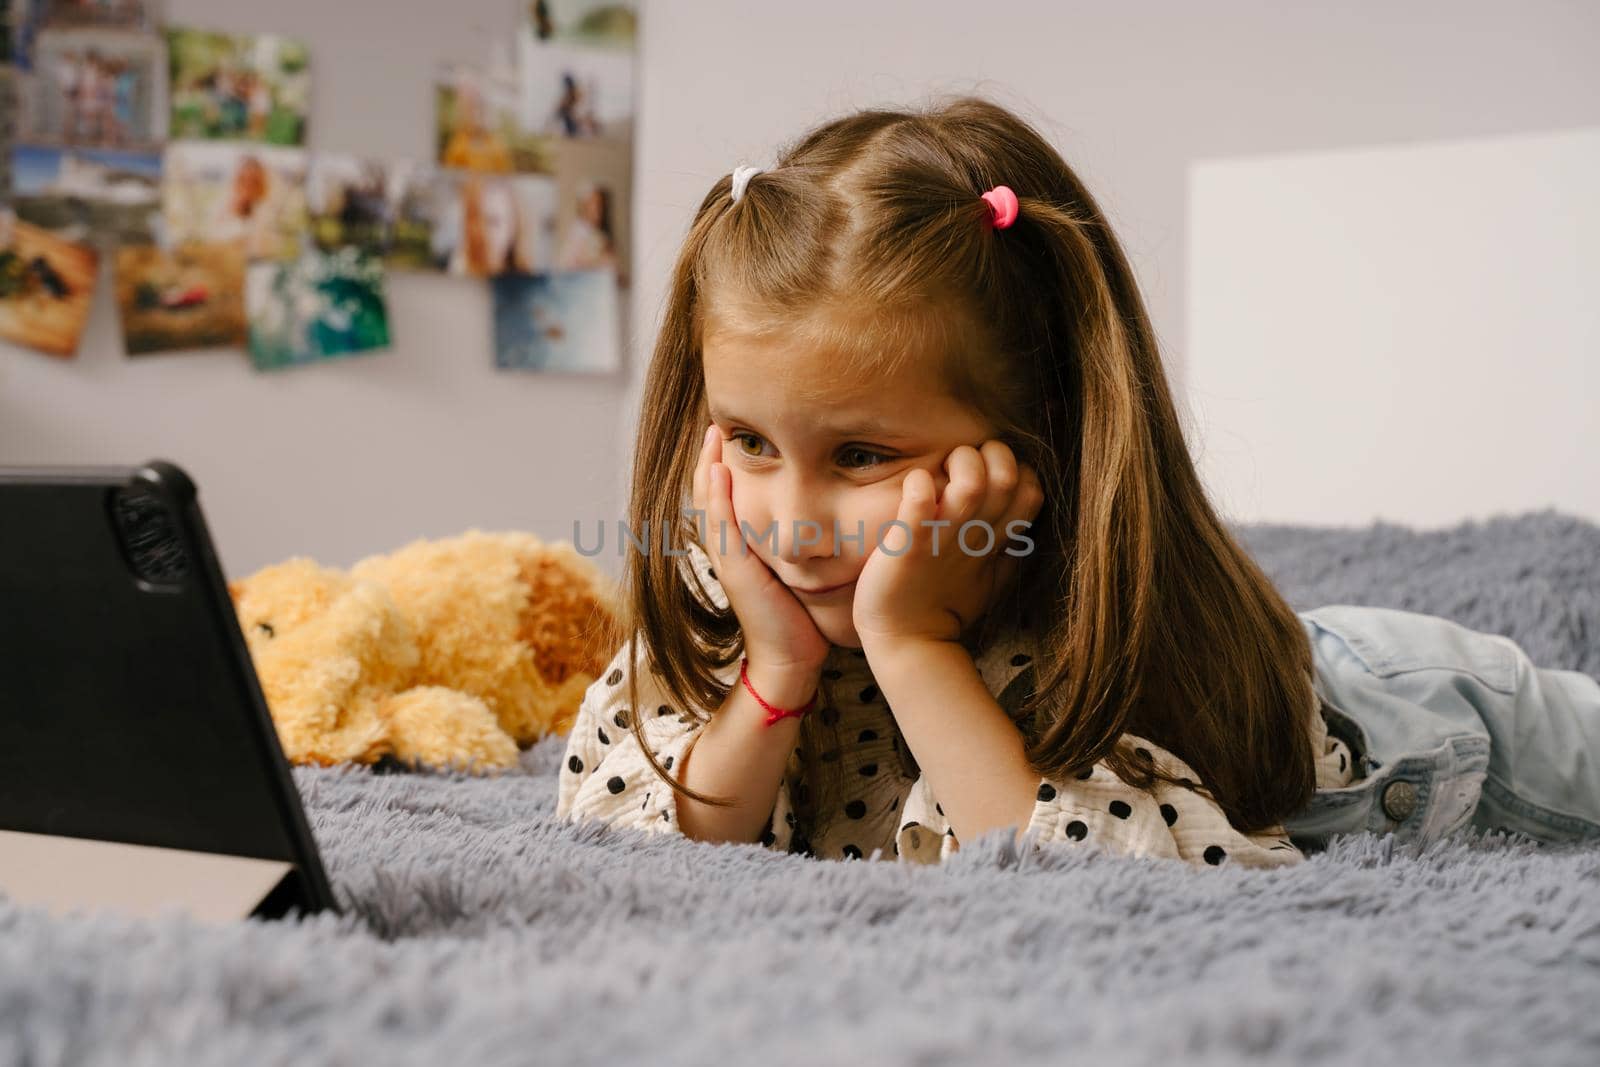 The child lies on the bed and watches cartoons on the tablet. A little girl in a polka dot print shirt. The child smiles. A little girl is talking very emotionally over a video link.